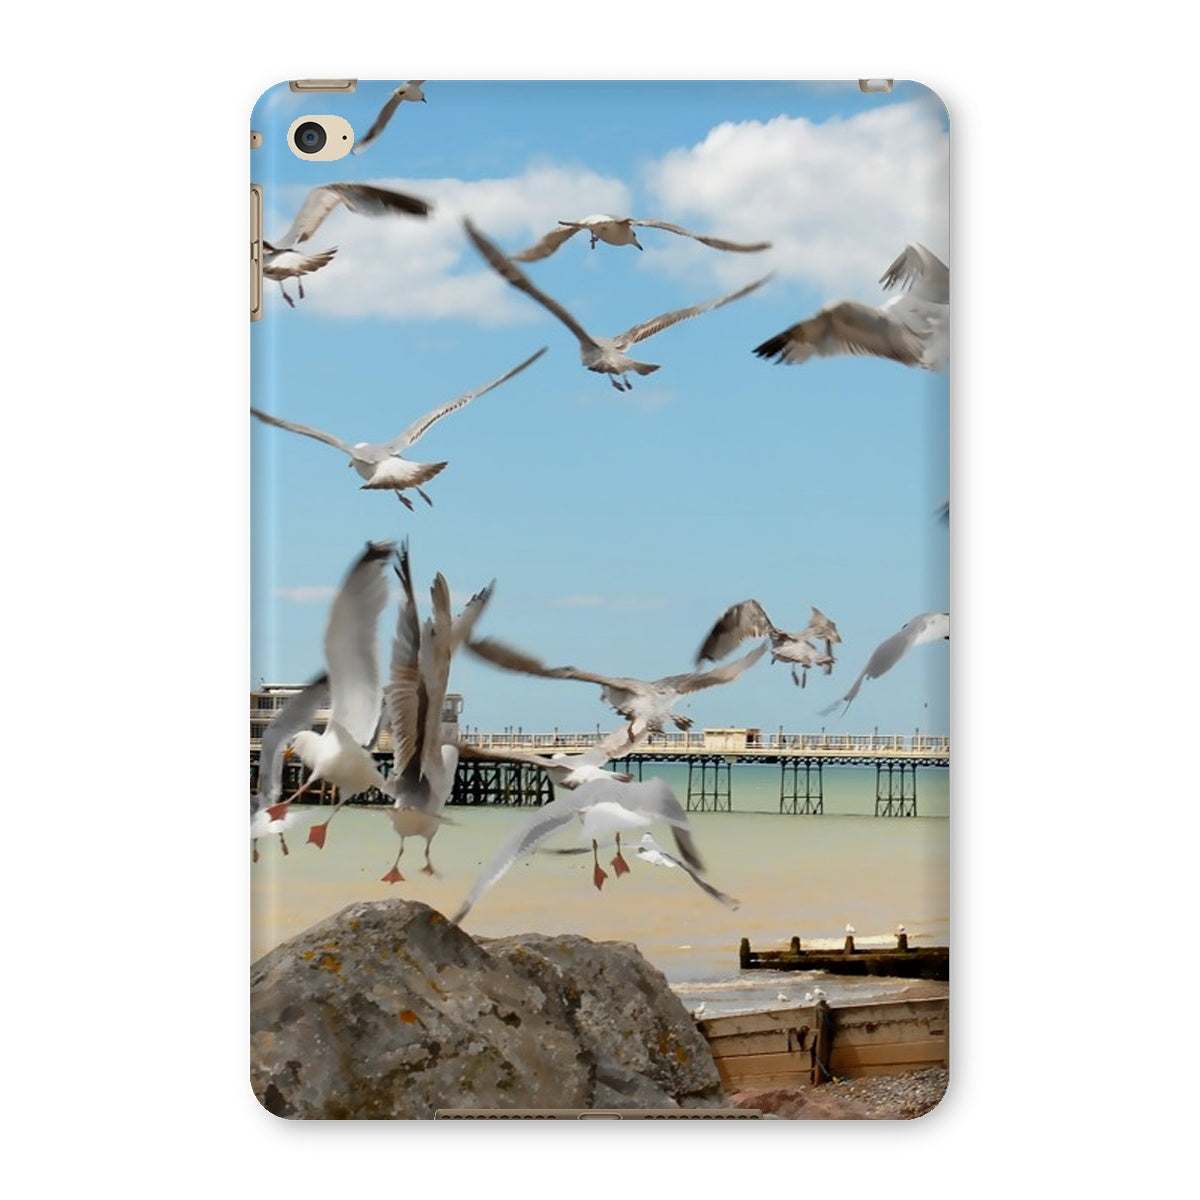 Seagulls At Feeding Time By David Sawyer Tablet Cases